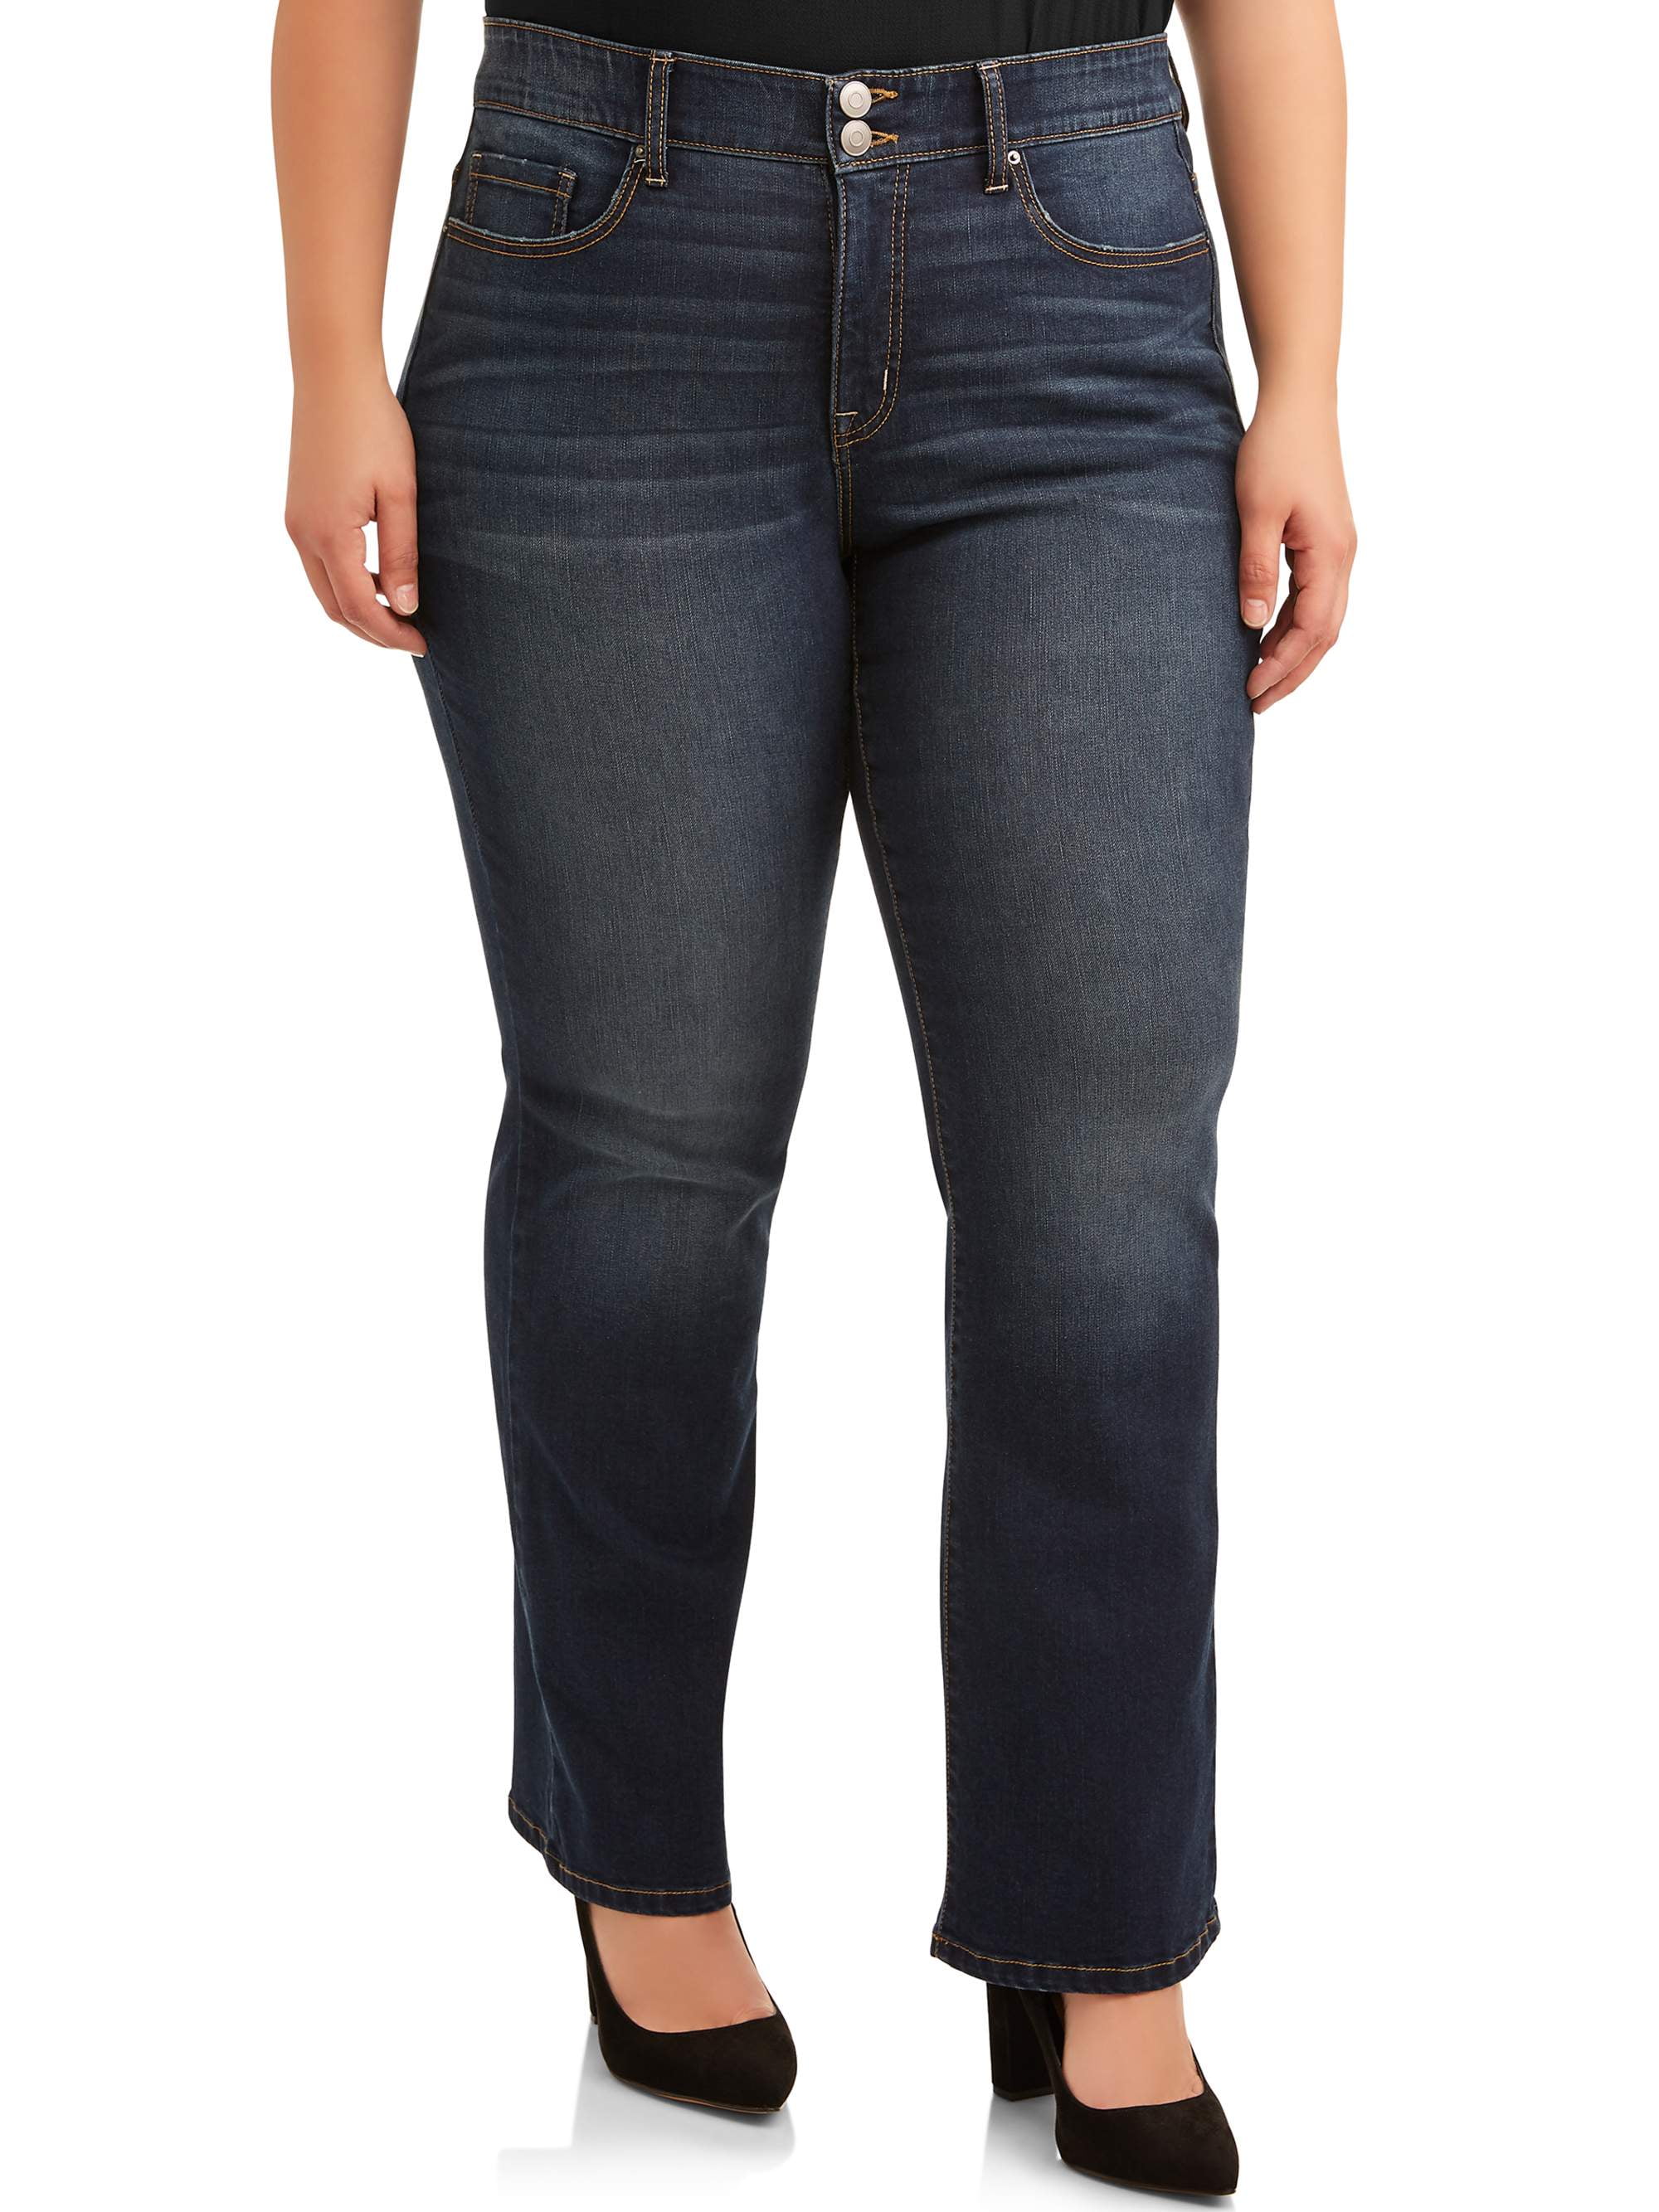 terra and sky women's jeans